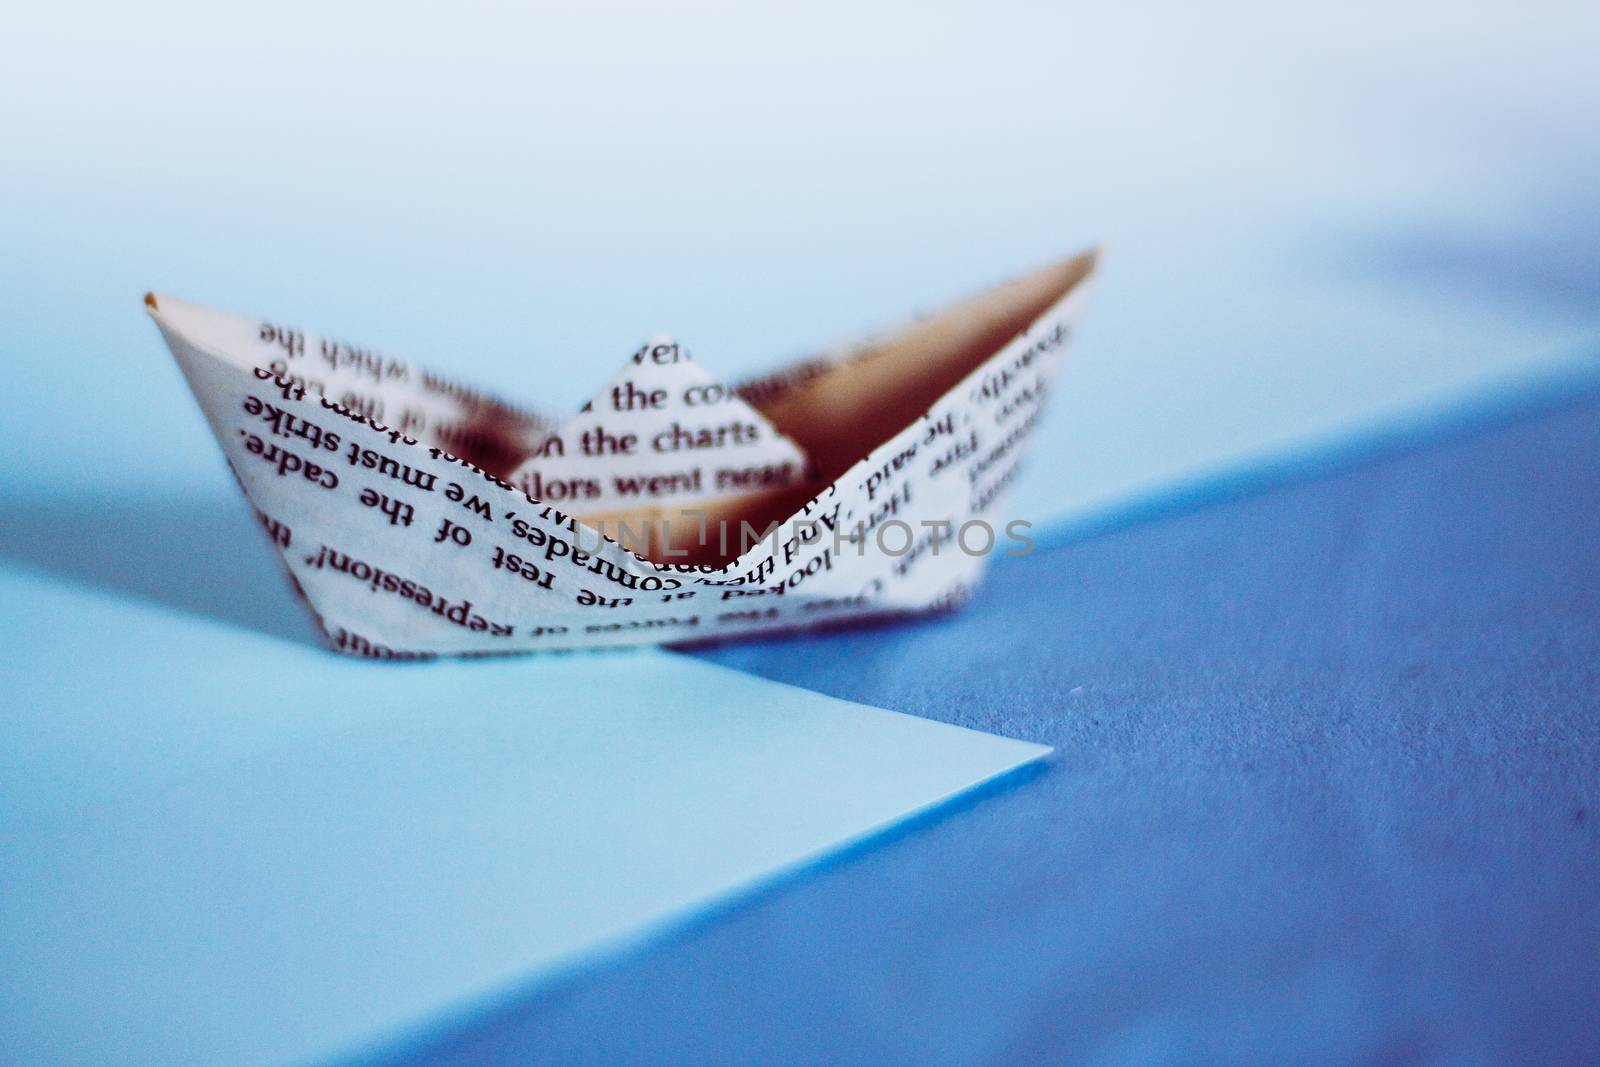 A paper boat made from old newspaper page against blue colored paper showing the concept of childhood dream, aspirations, hope and finances